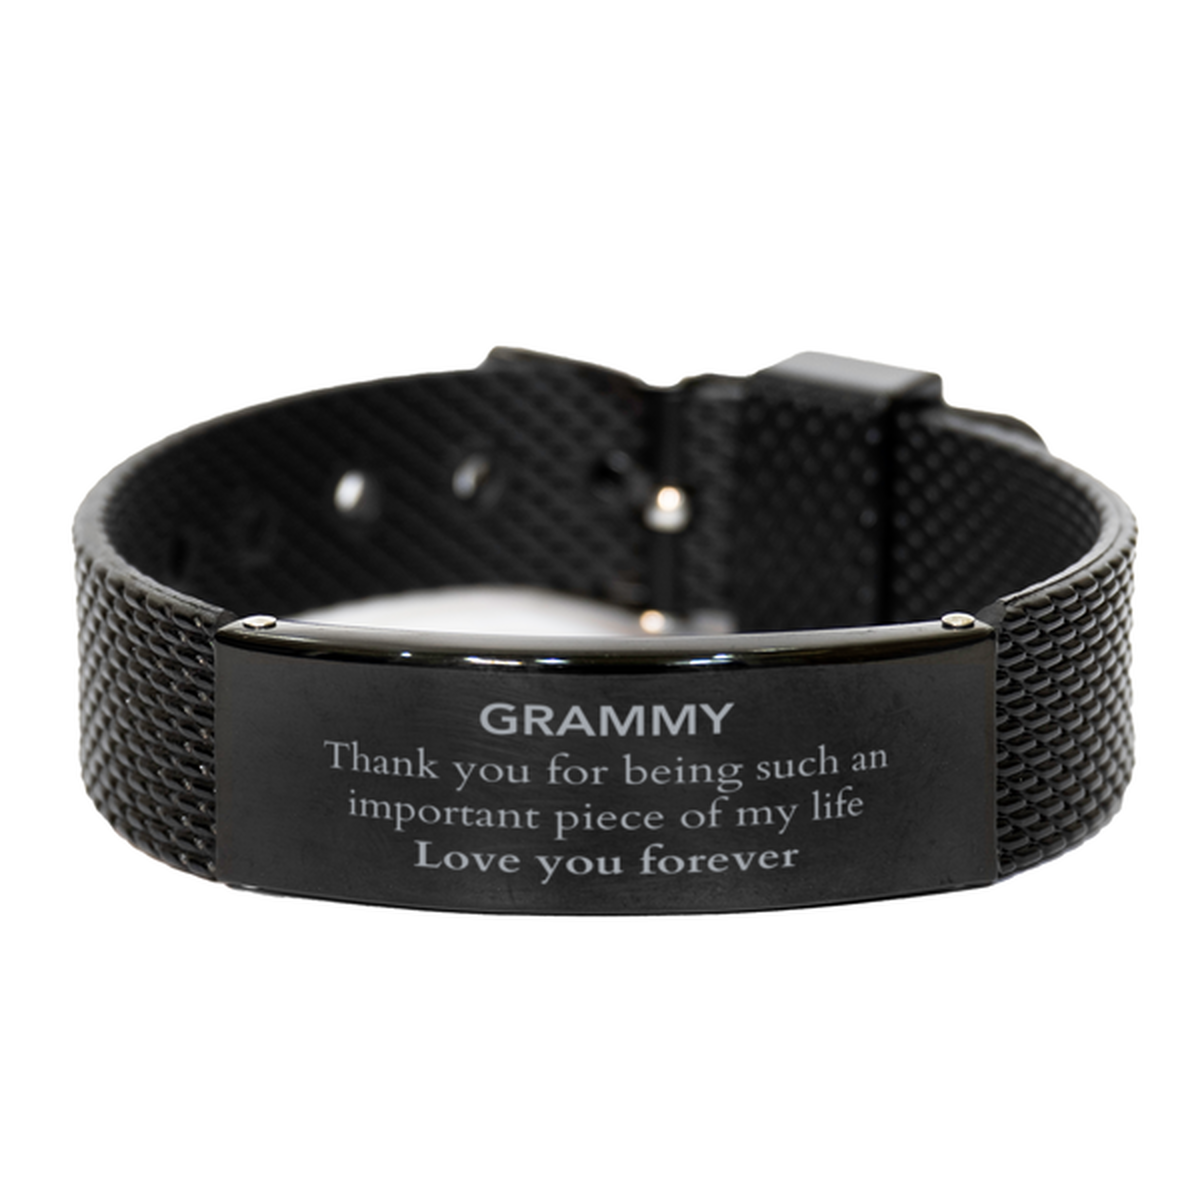 Appropriate Grammy Black Shark Mesh Bracelet Epic Birthday Gifts for Grammy Thank you for being such an important piece of my life Grammy Christmas Mothers Fathers Day